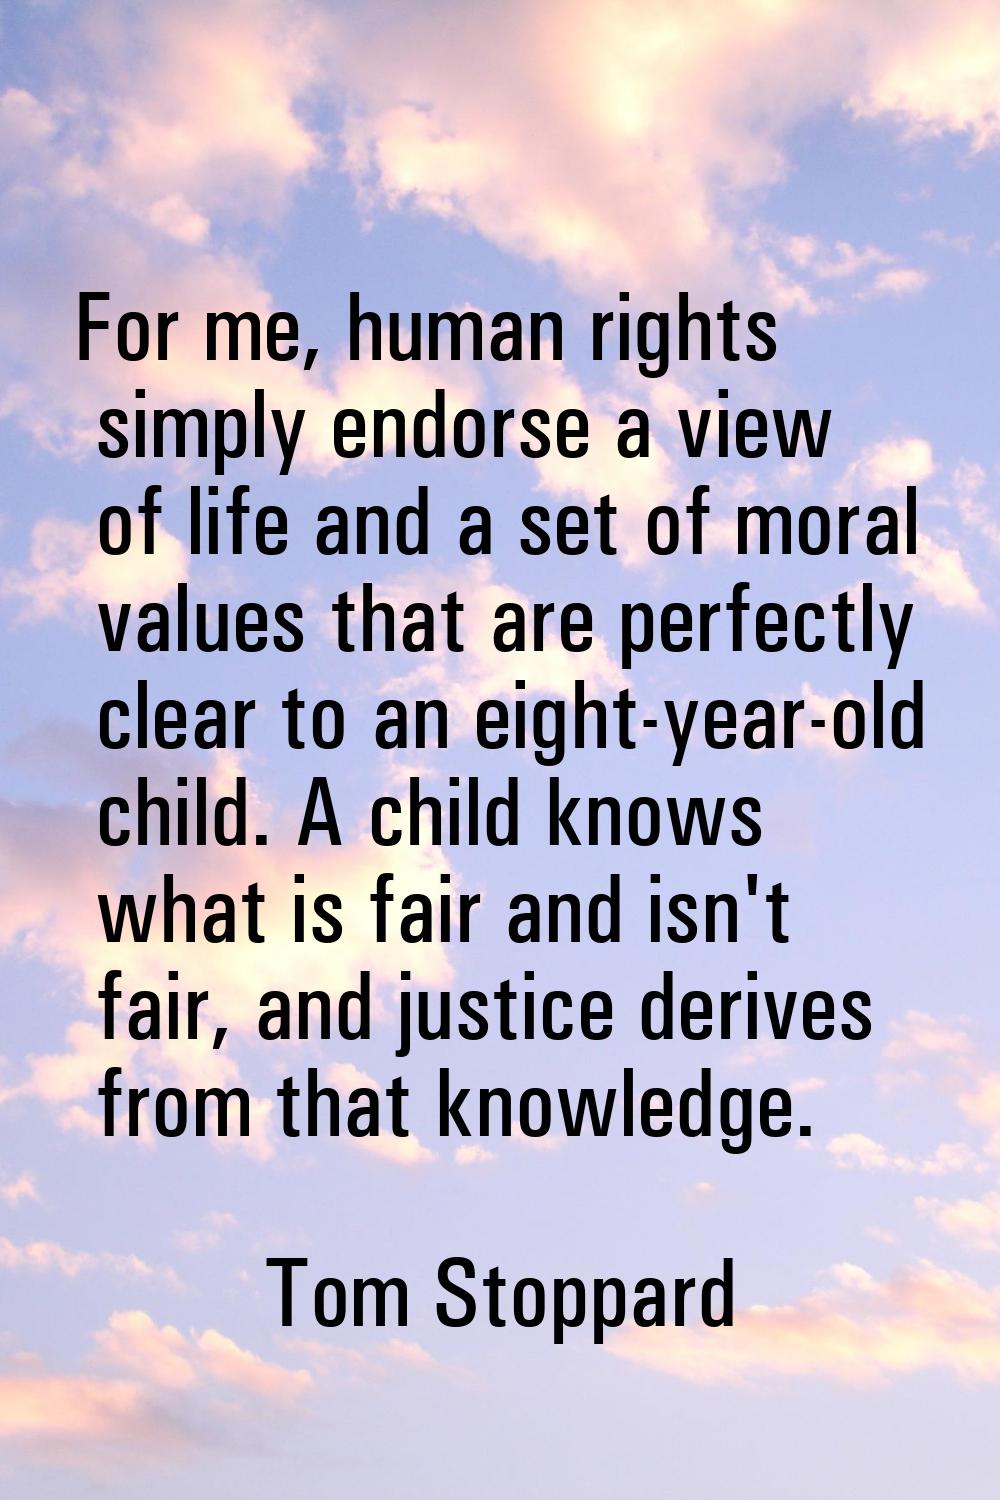 For me, human rights simply endorse a view of life and a set of moral values that are perfectly cle